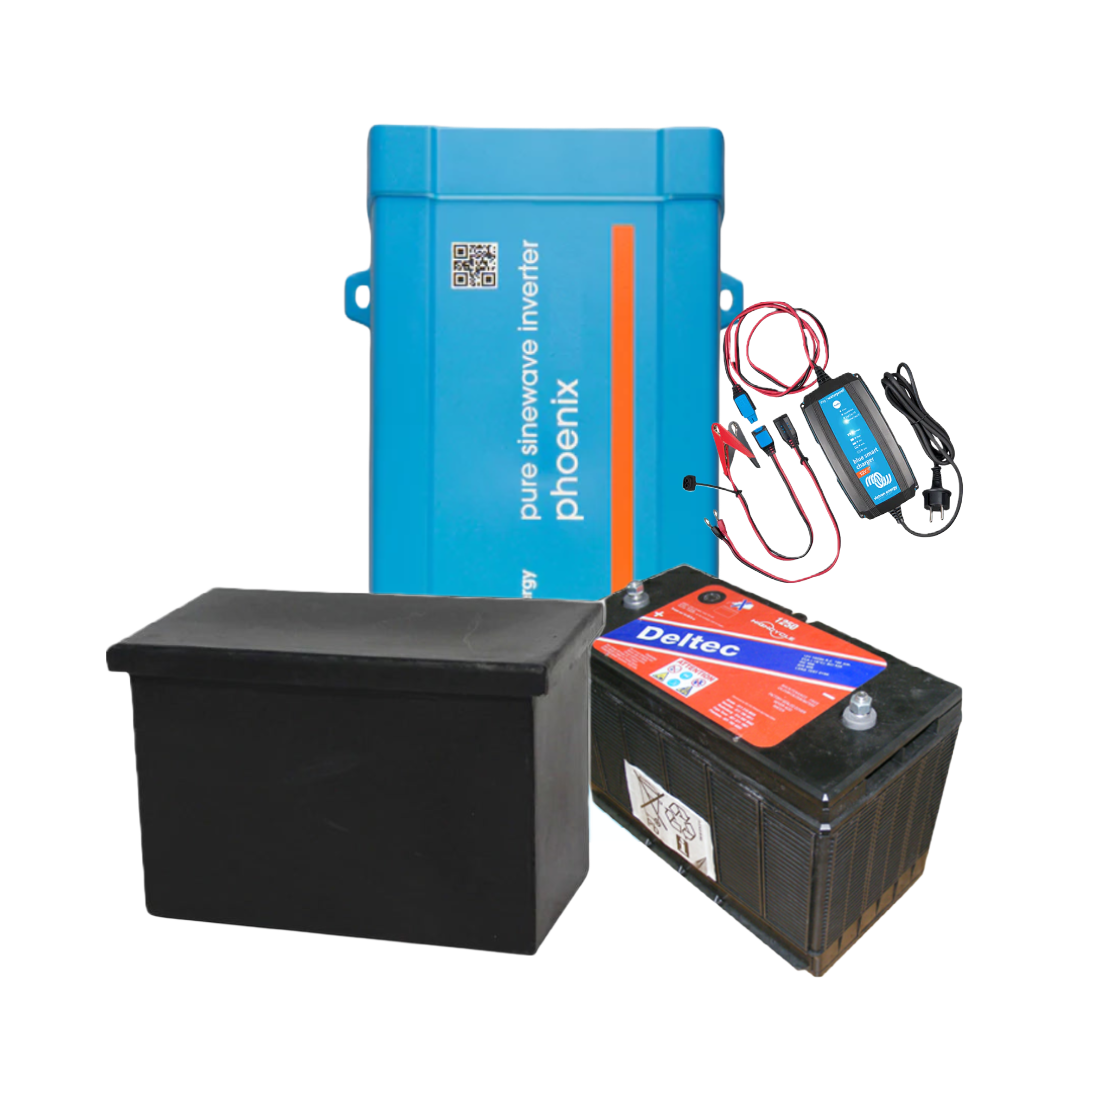 Sustainable 400W Power Box with Lead Acid Battery